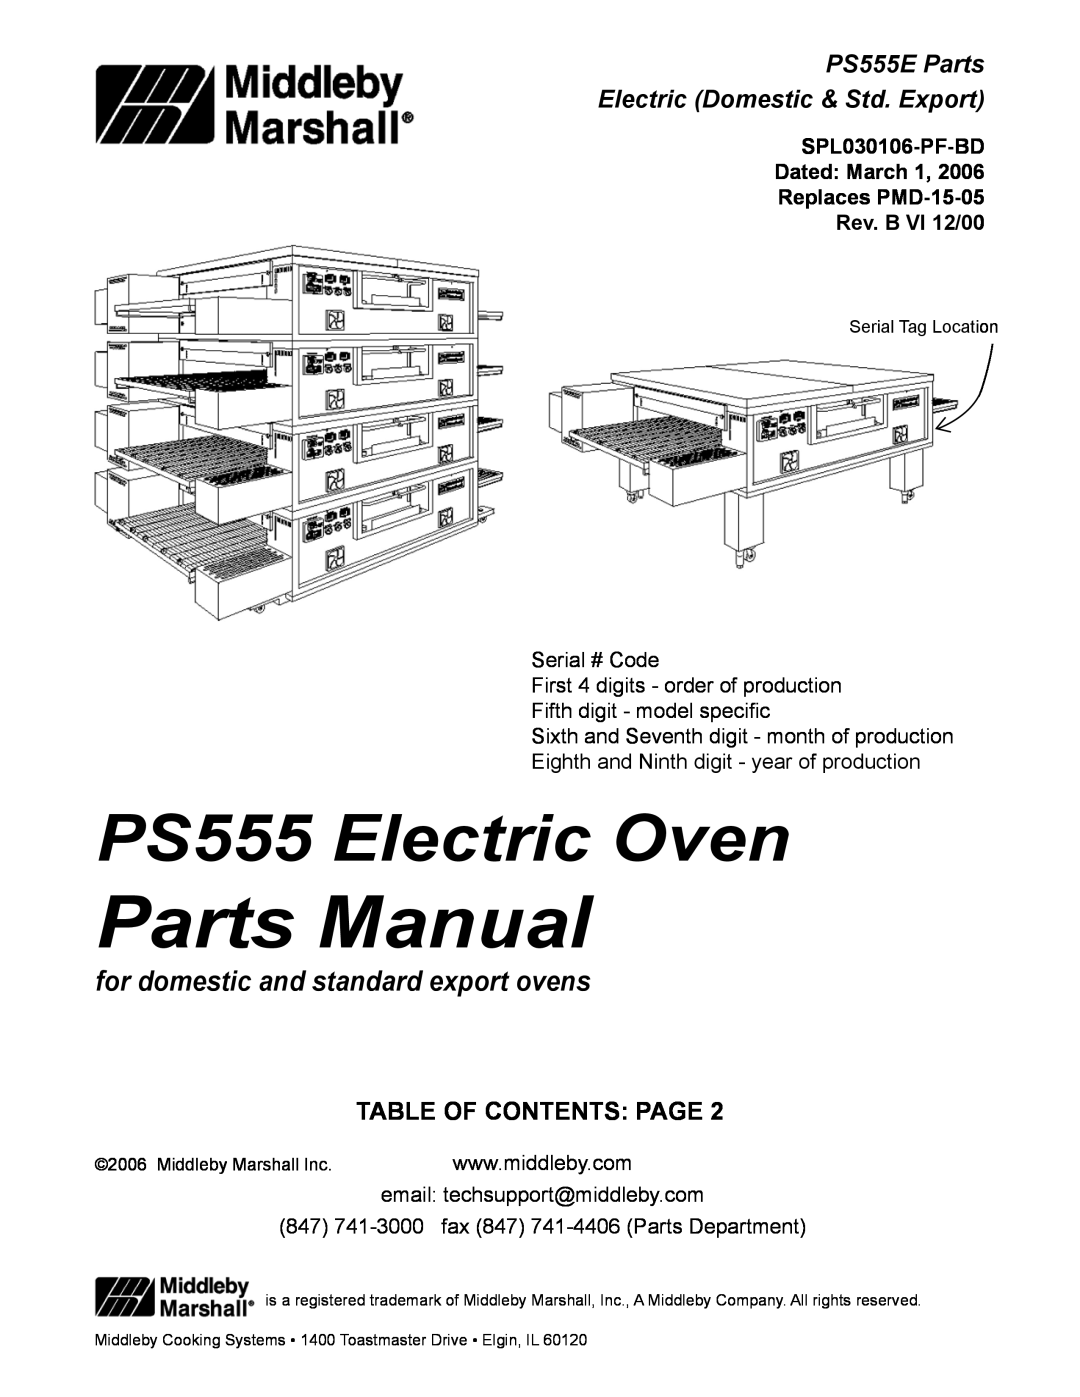 Middleby Marshall PS555 manual SPL030106-PF-BD Dated: March 1, Replaces PMD-15-05 Rev. B VI 12/00, Parts Manual 